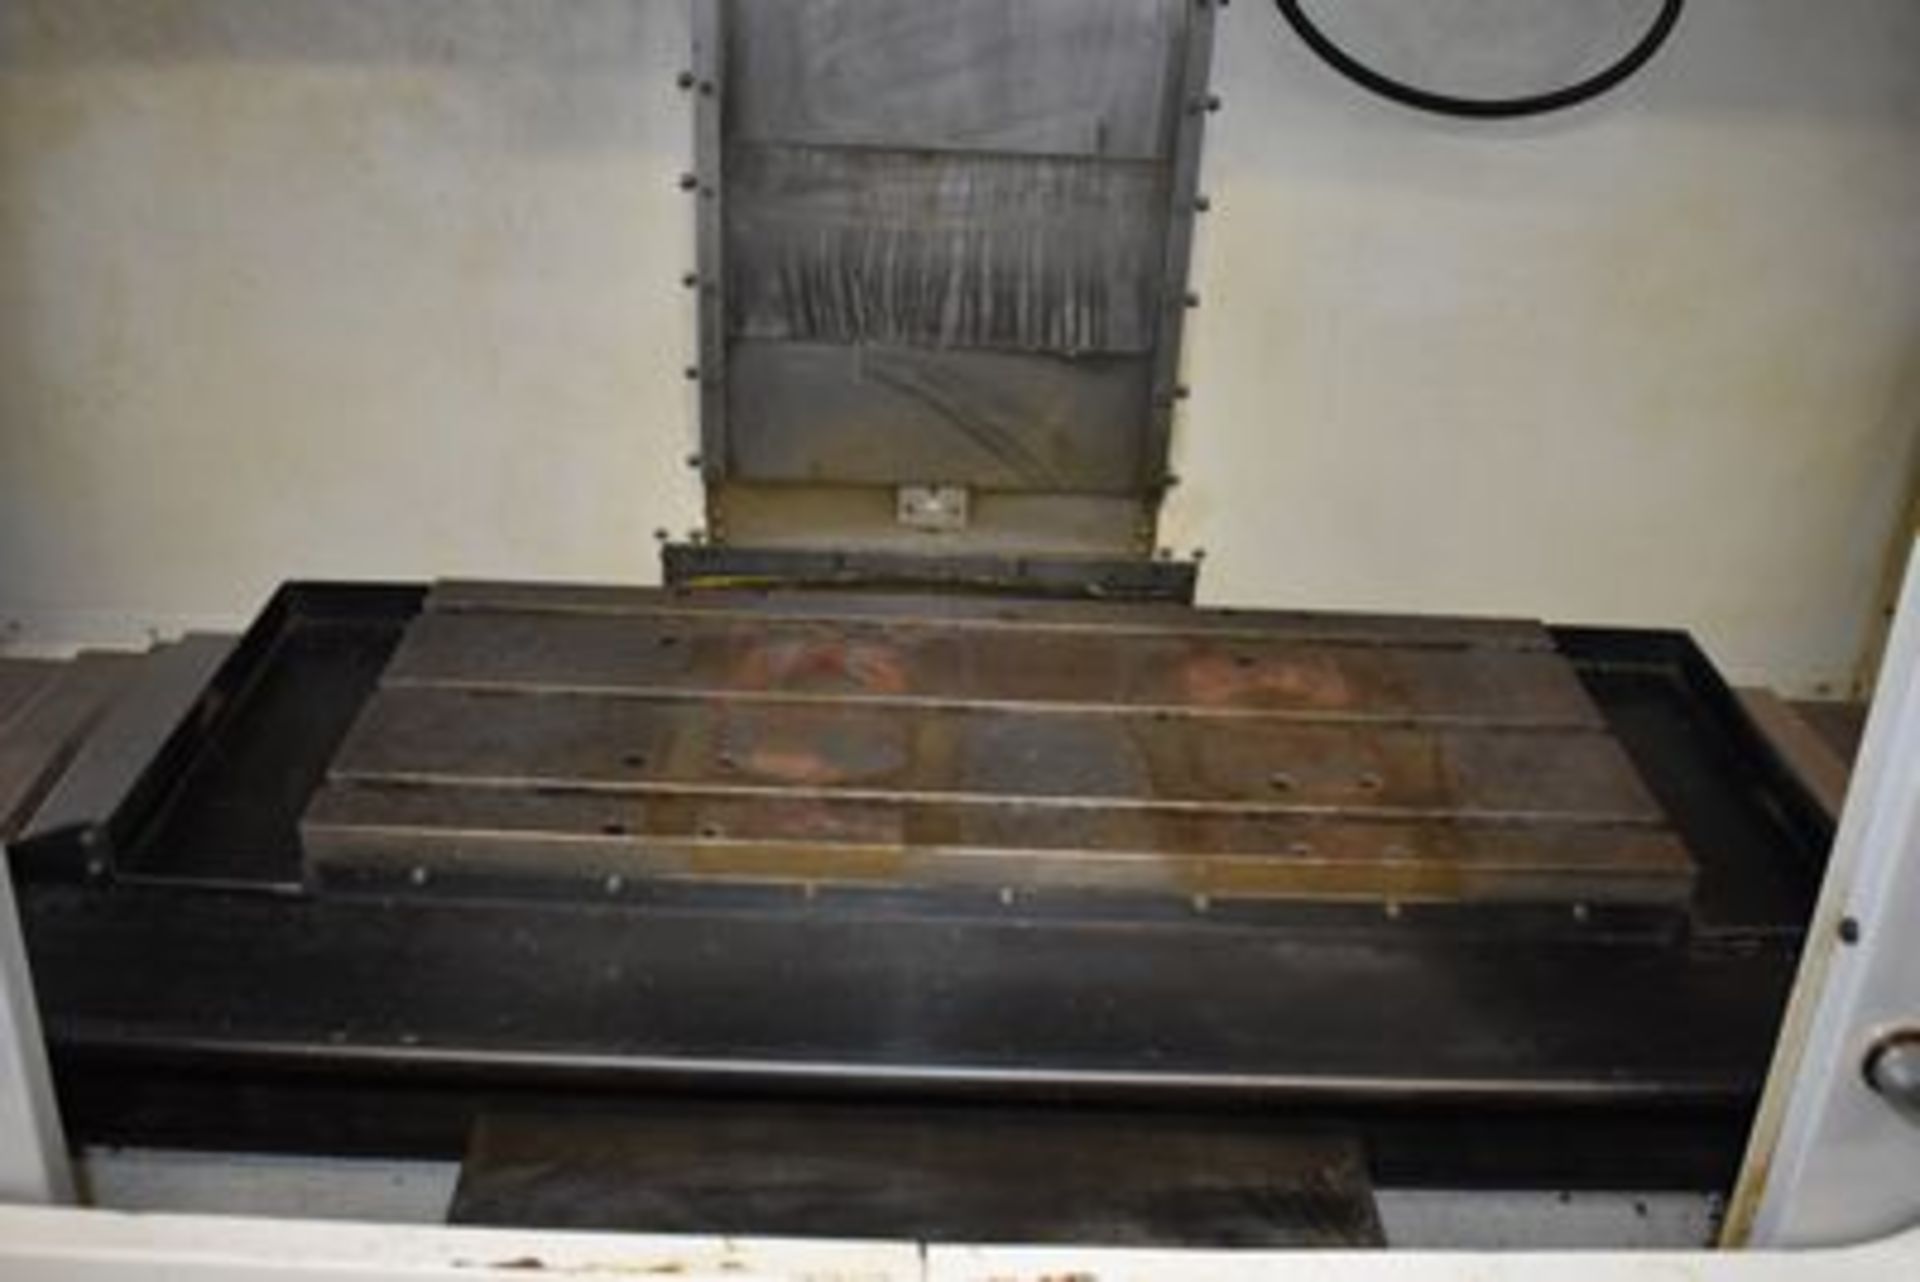 HAAS MACHINING CENTER, MDL:VF-2SS, YEAR:2008, HAAS CNC CTRL, 24 POSITION TOOL CHANGER - Image 4 of 8